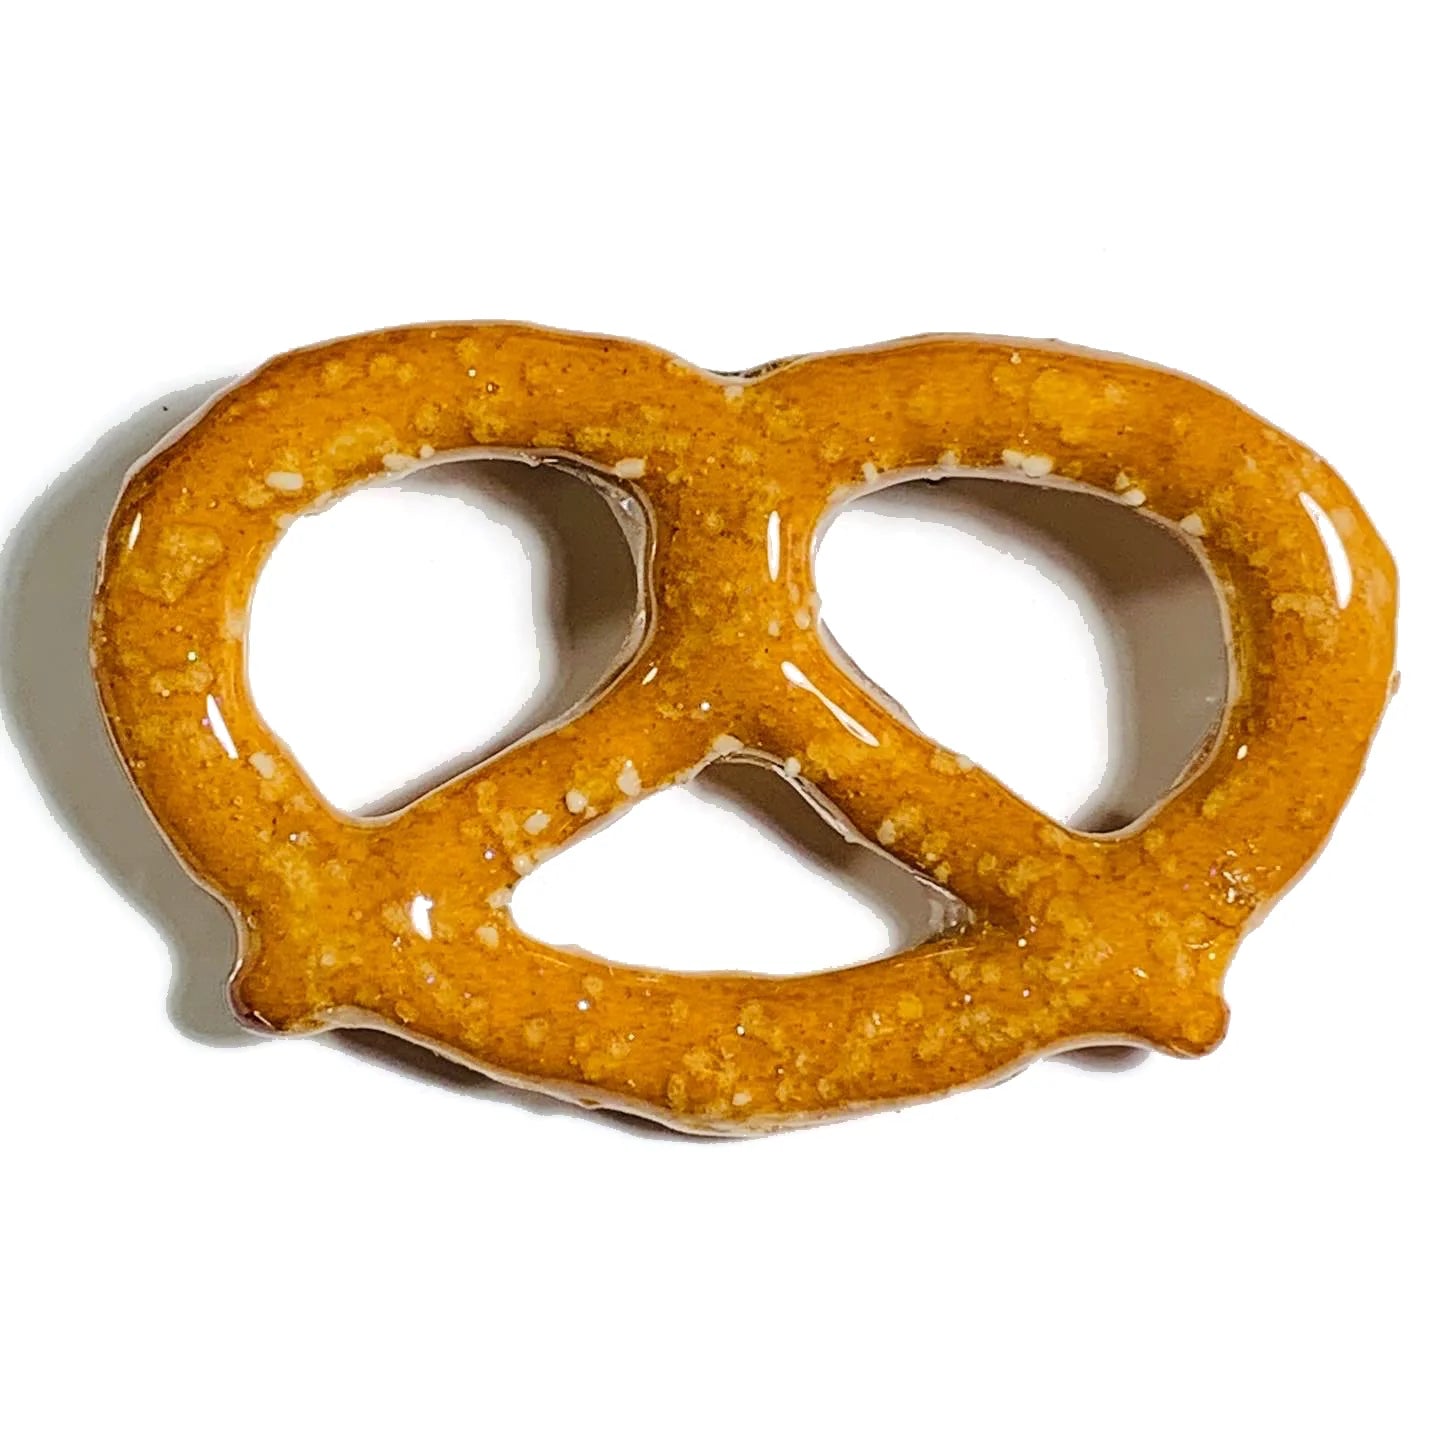 Large pretzel coated in glitter resin and turned into a brooch/pin